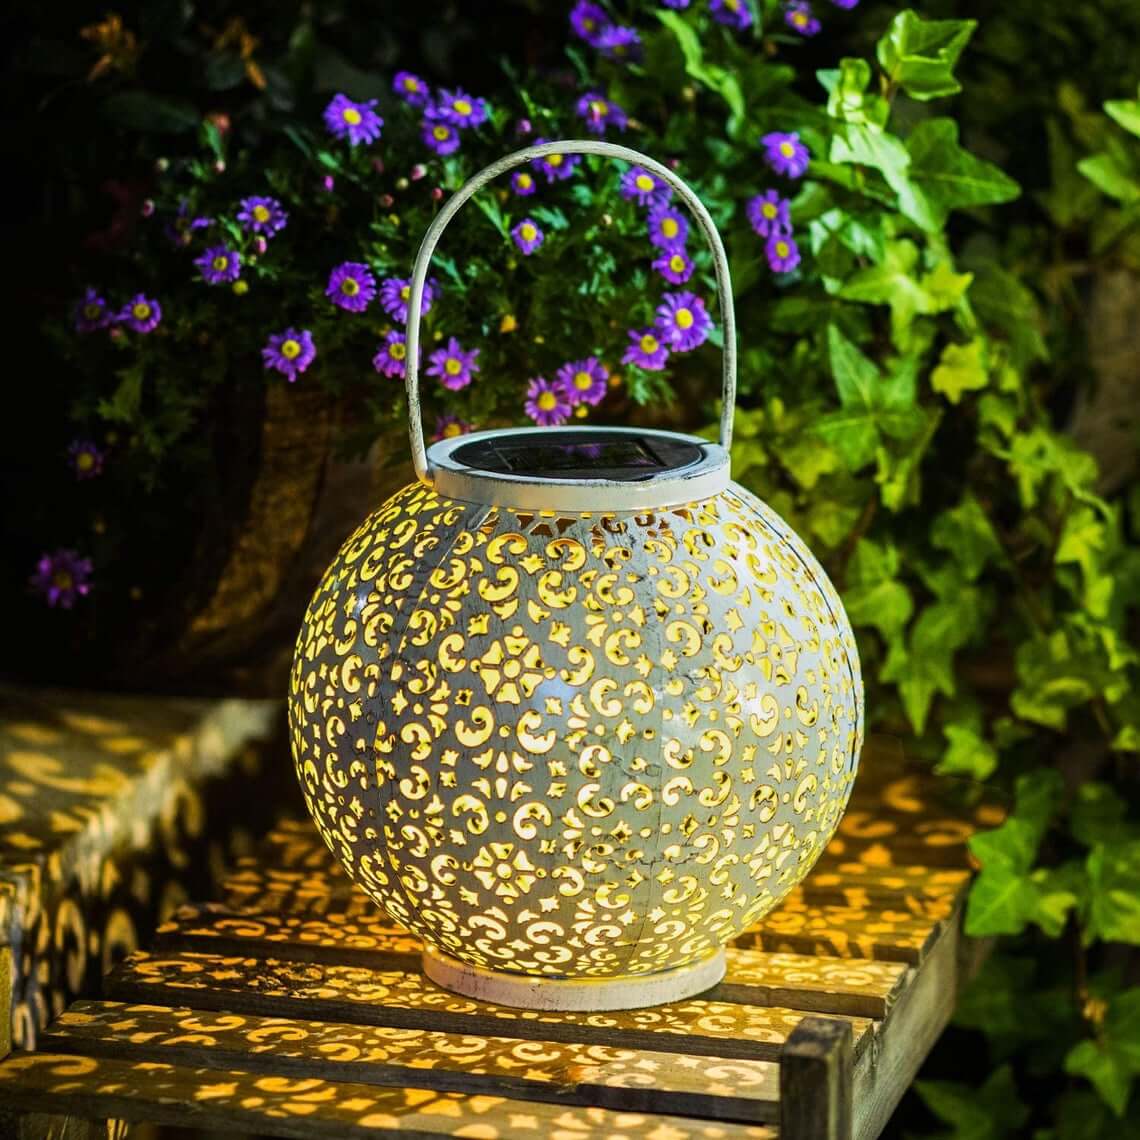 Intricate and Ornate Outdoor Chinese Lantern